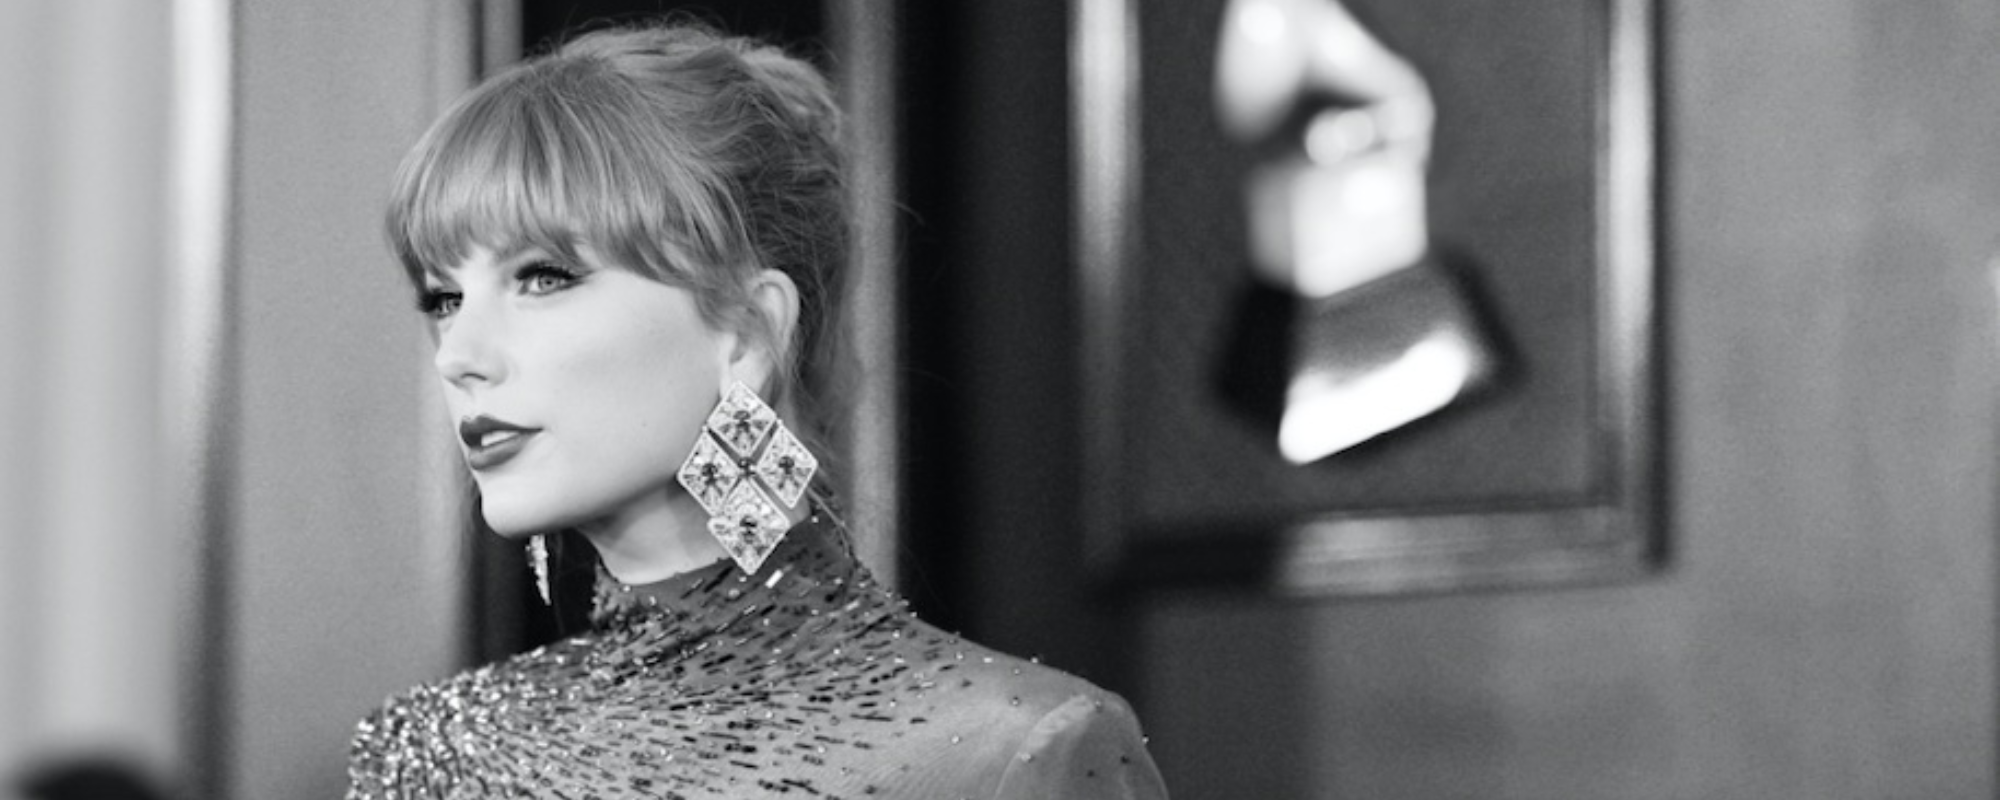 3 Ways Taylor Swift Has Disrupted the Music Industry